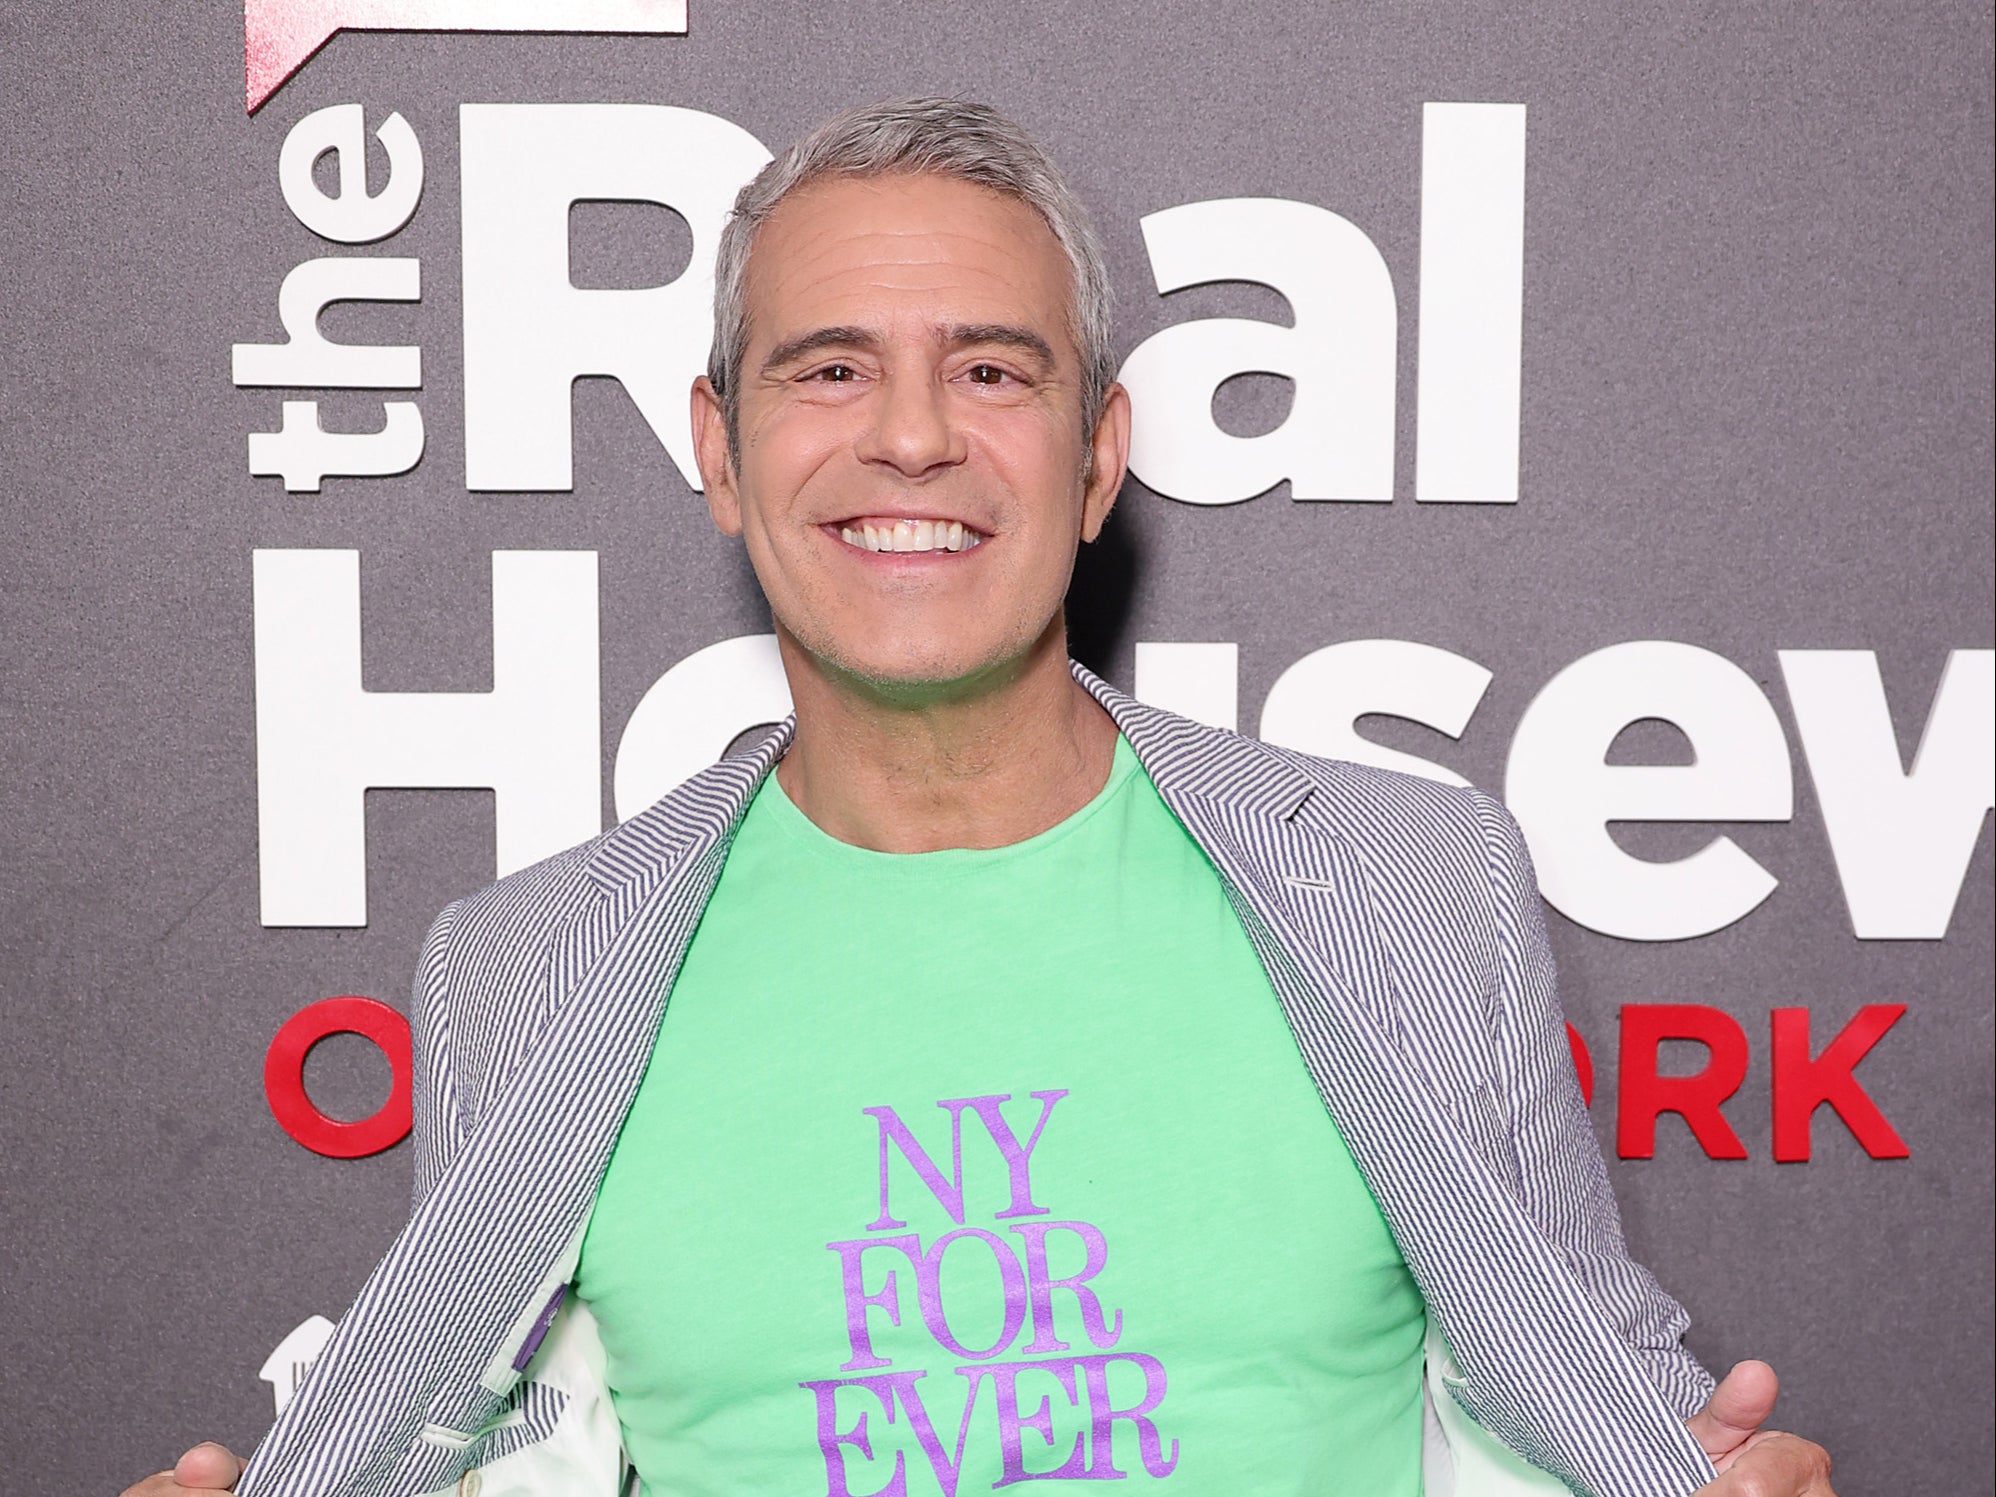 Andy Cohen has been cleared of misconduct claims following a Bravo investigation